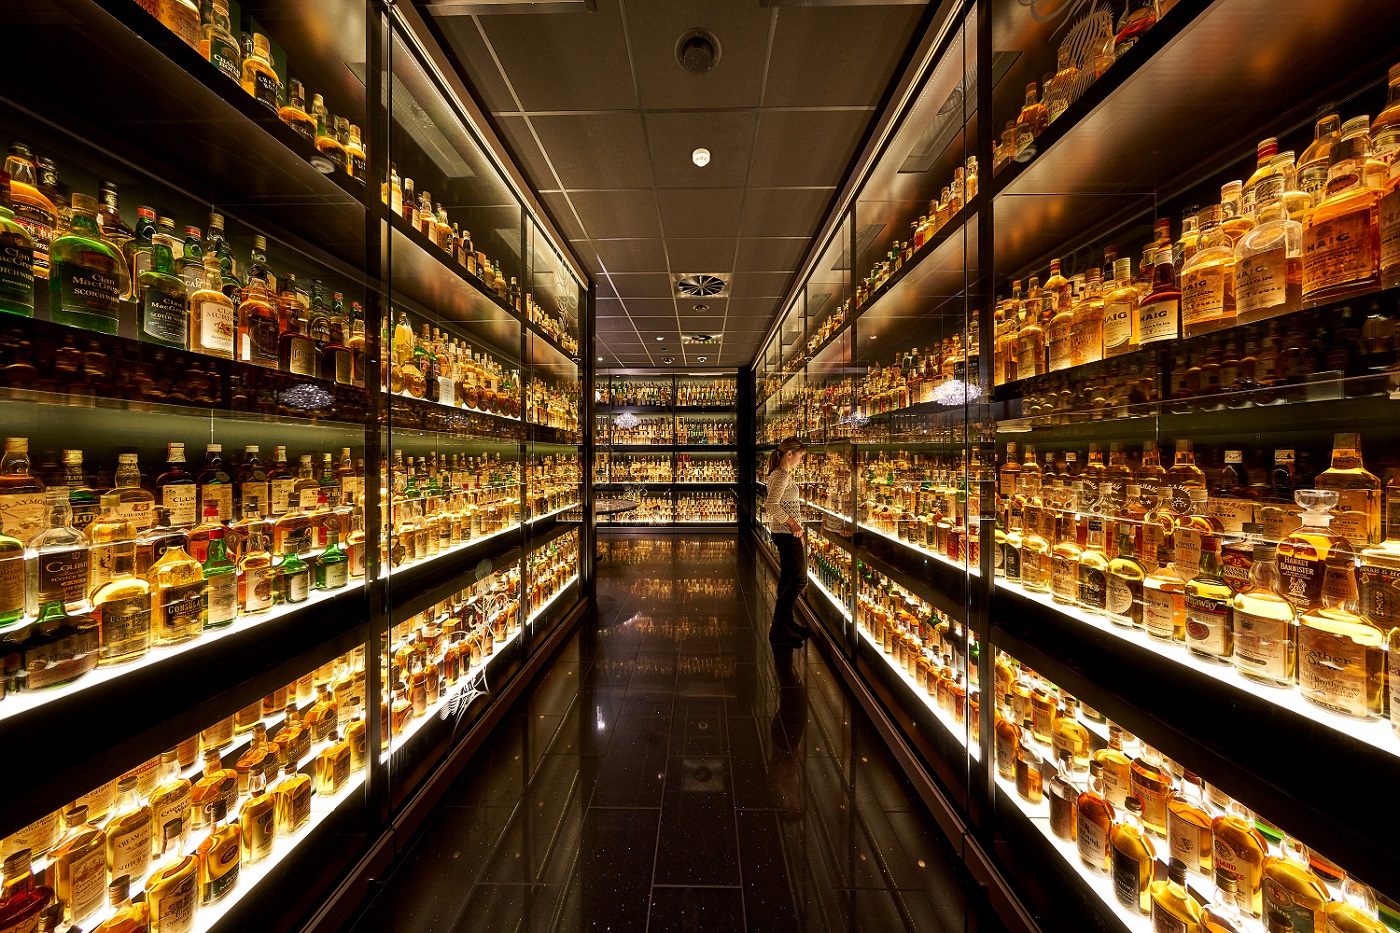 One of the World's largest collections of Scotch whisky open to the public.